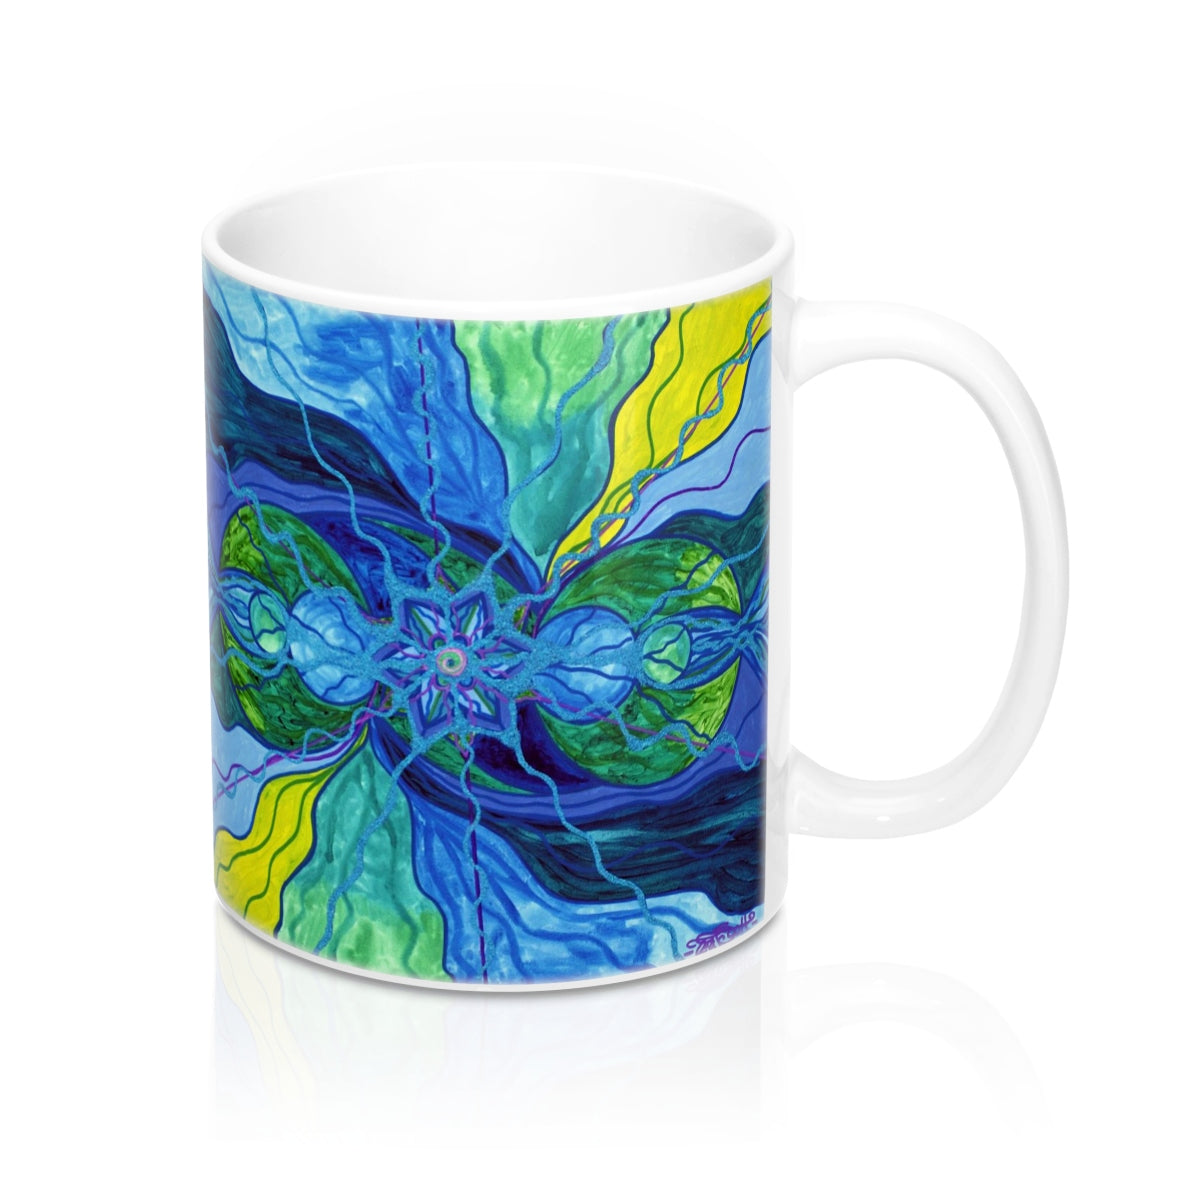 the-worlds-best-authentic-tranquility-mug-hot-on-sale_0.jpg